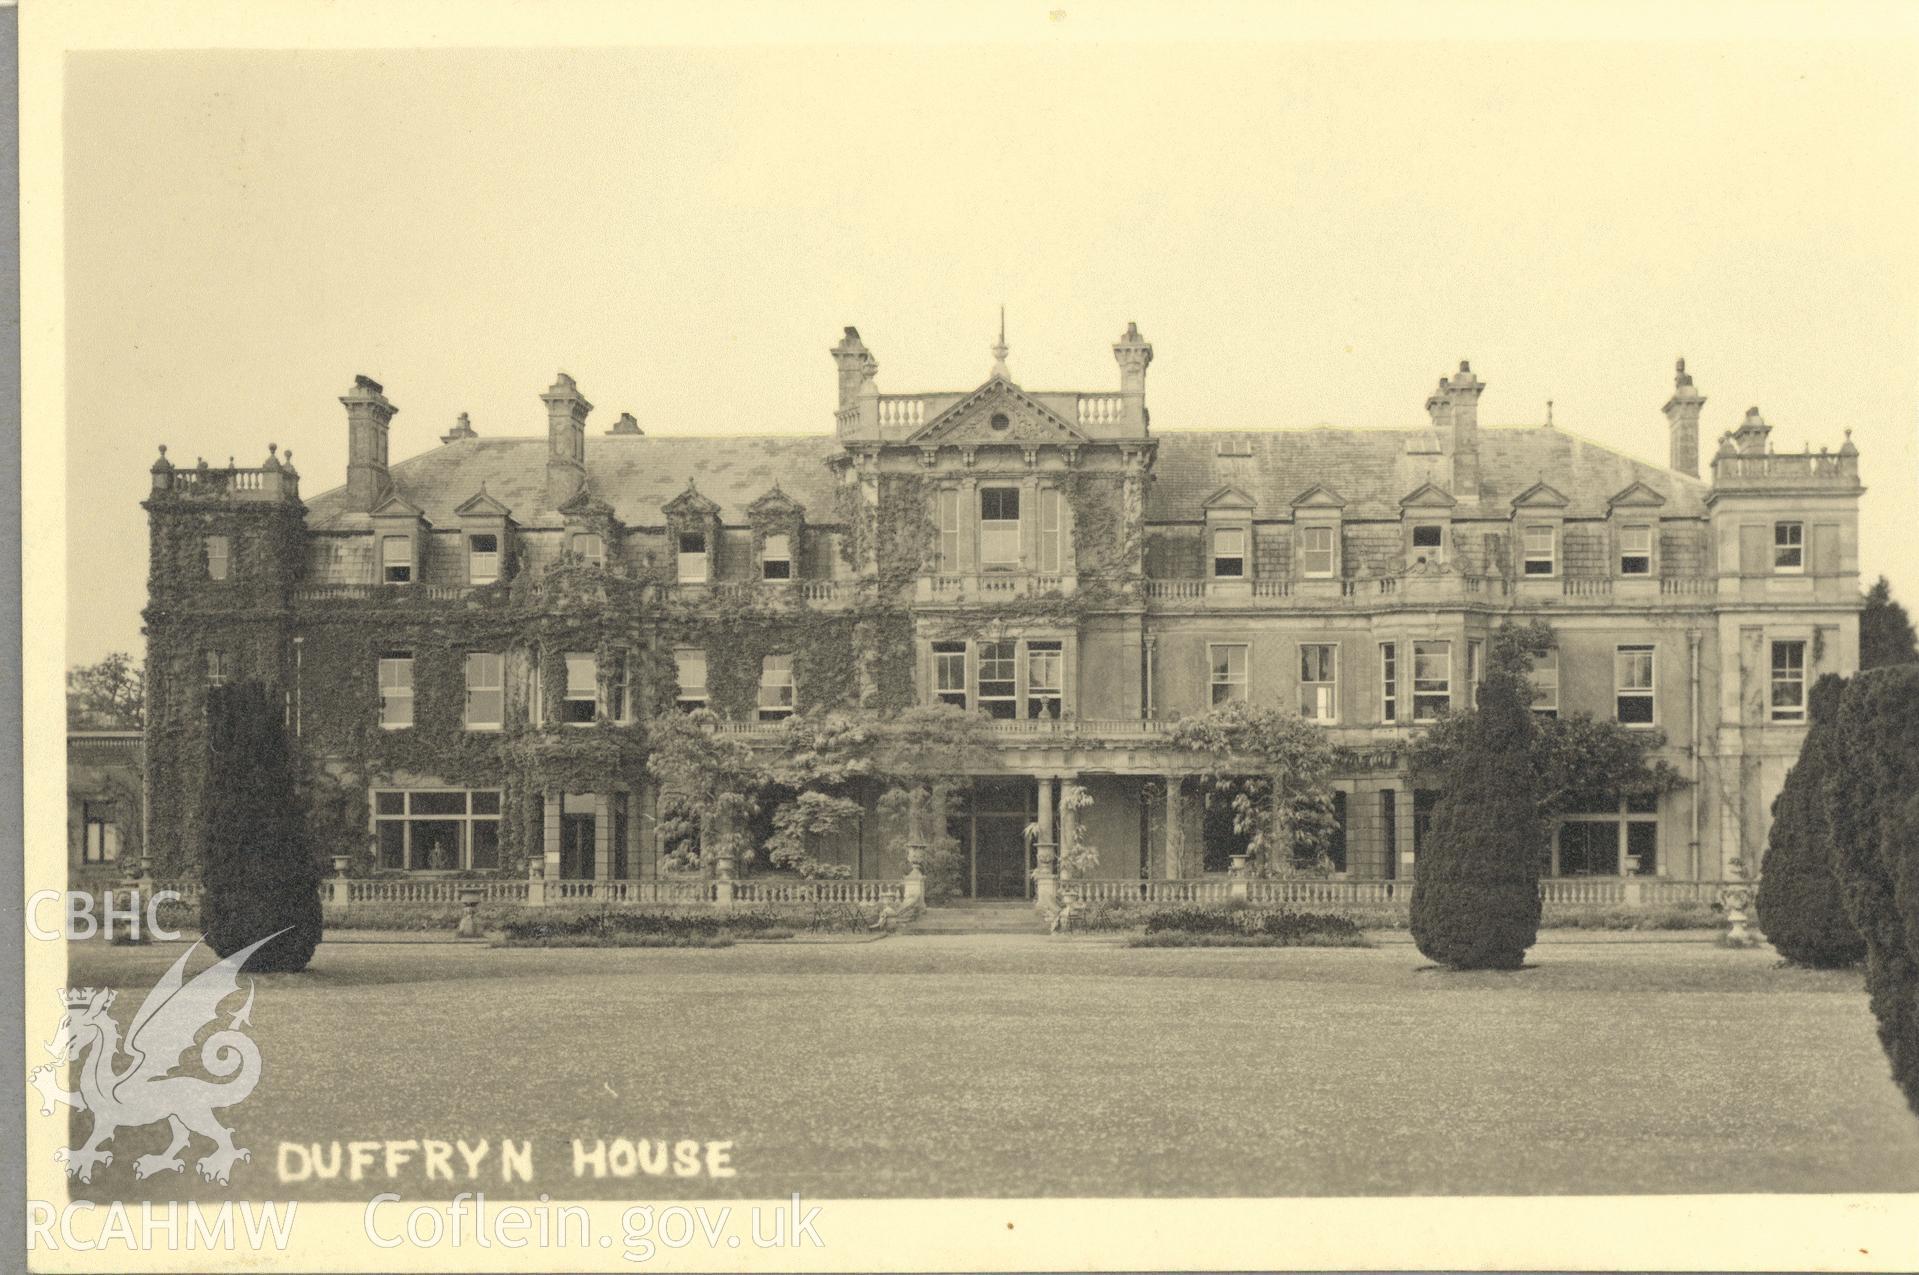 Digitised postcard image of Dyffryn house, St Nicholas and Bonvilston. Produced by Parks and Gardens Data Services, from an original item in the Peter Davis Collection at Parks and Gardens UK. We hold only web-resolution images of this collection, suitable for viewing on screen and for research purposes only. We do not hold the original images, or publication quality scans.